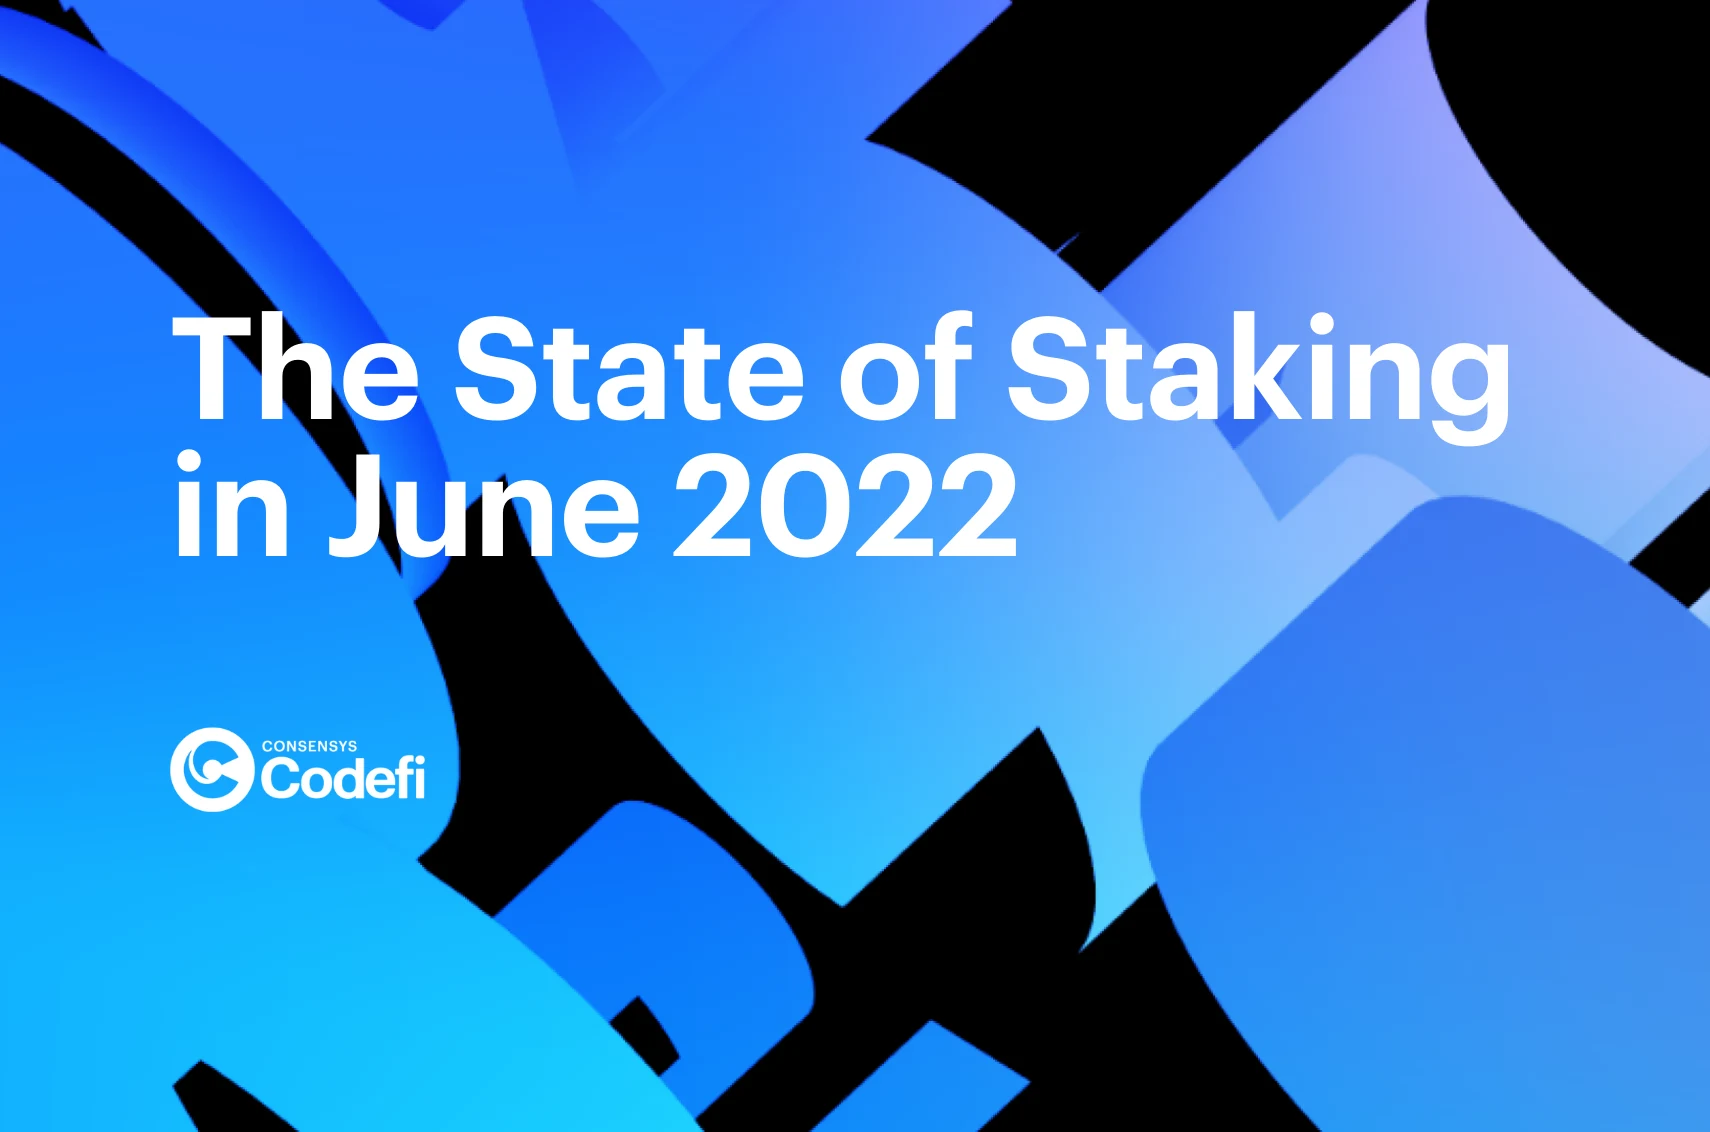 Image: The State of Staking in June 2022